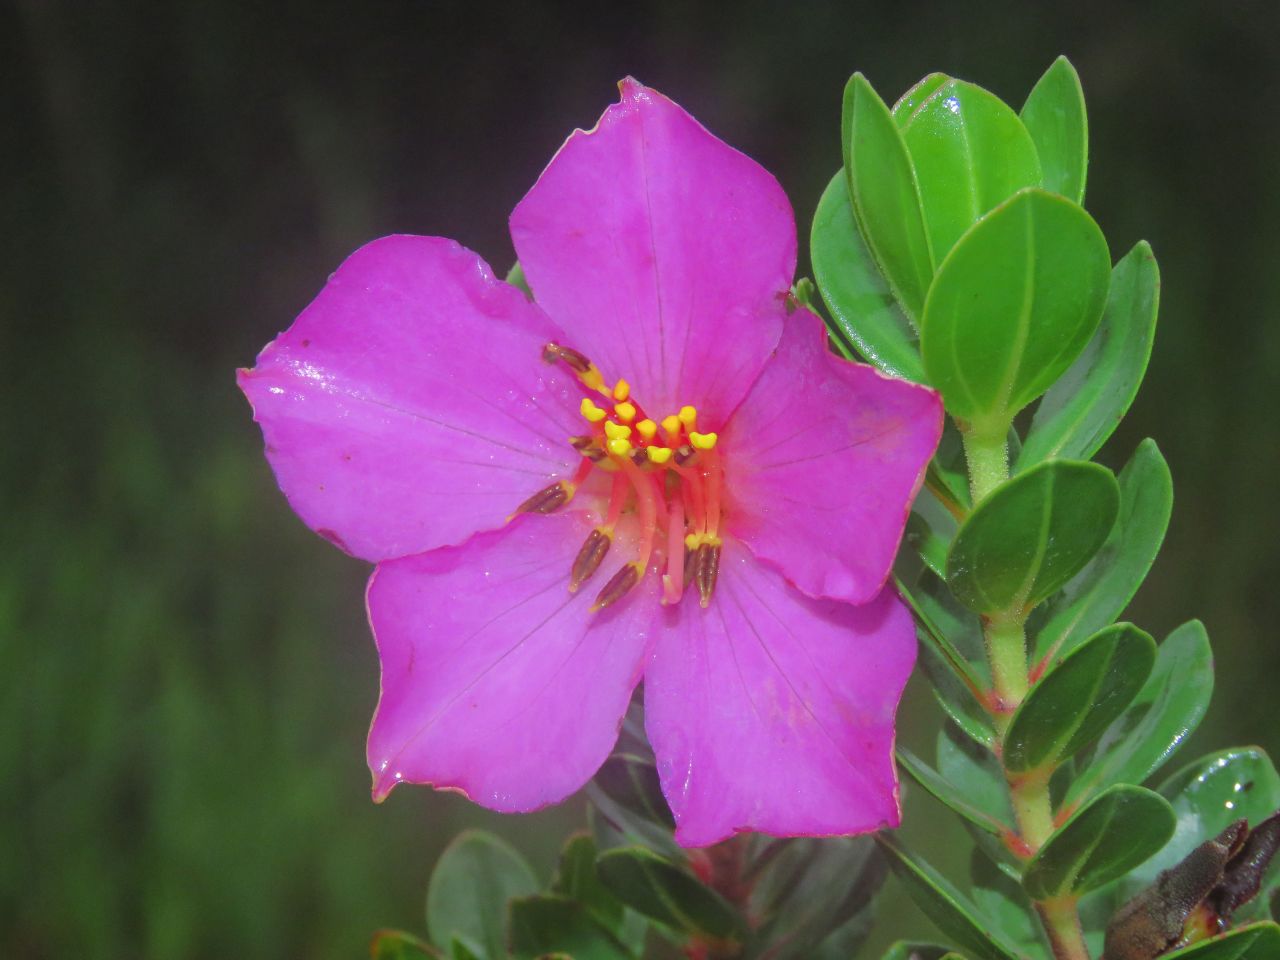 Academy researchers Frank Almeda and Ricardo Pacifico identified 13 new flowering plants on the isolated peaks of Brazil's campo rupestre, like the vibrant Microlicia daneui pictured here. 